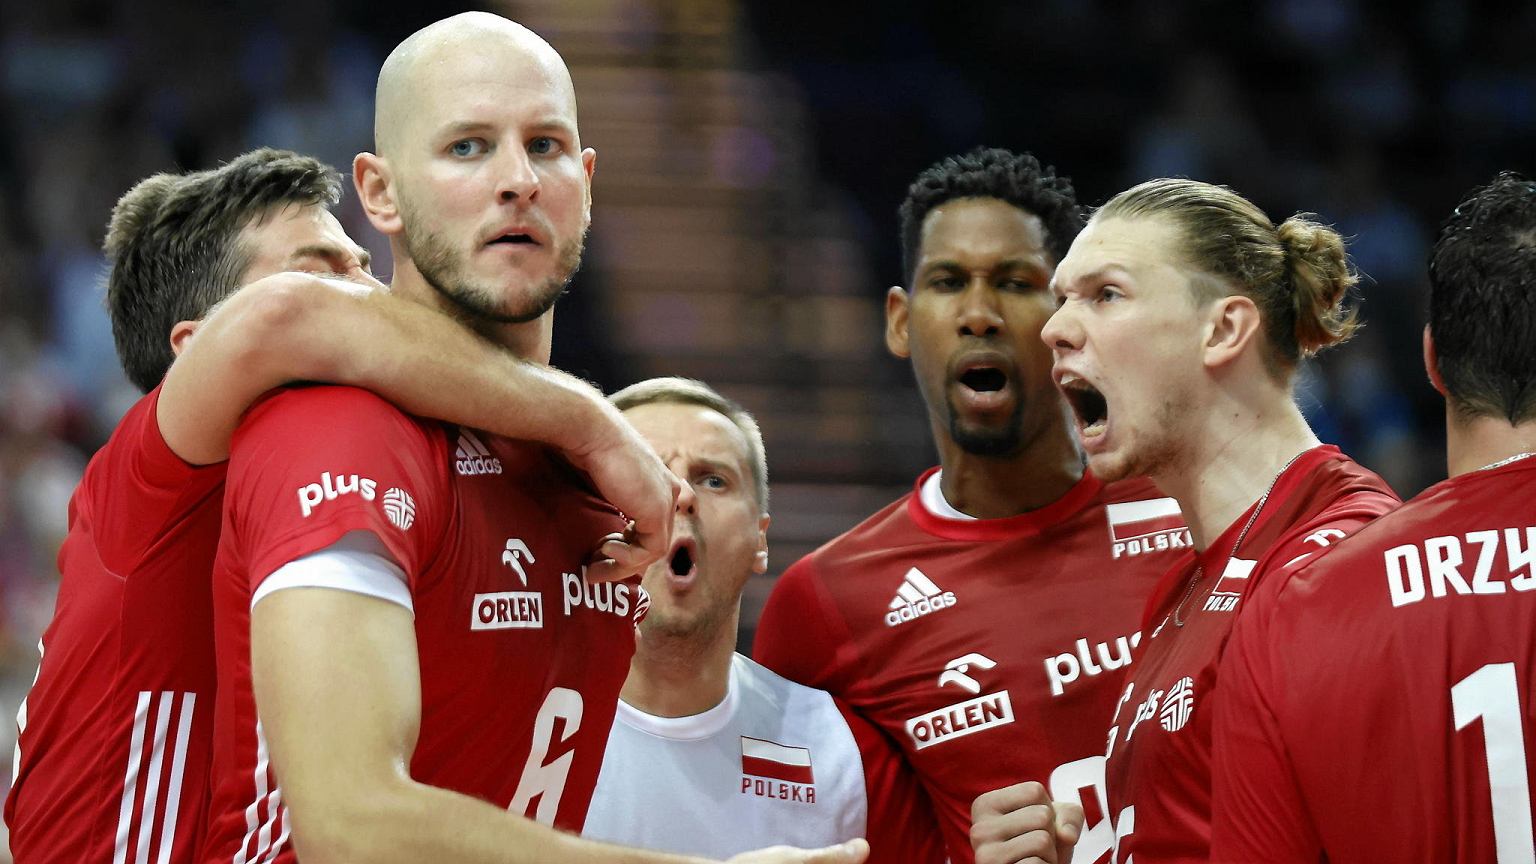 Poland - Slovenia in the semi-finals of the European Volleyball Championship